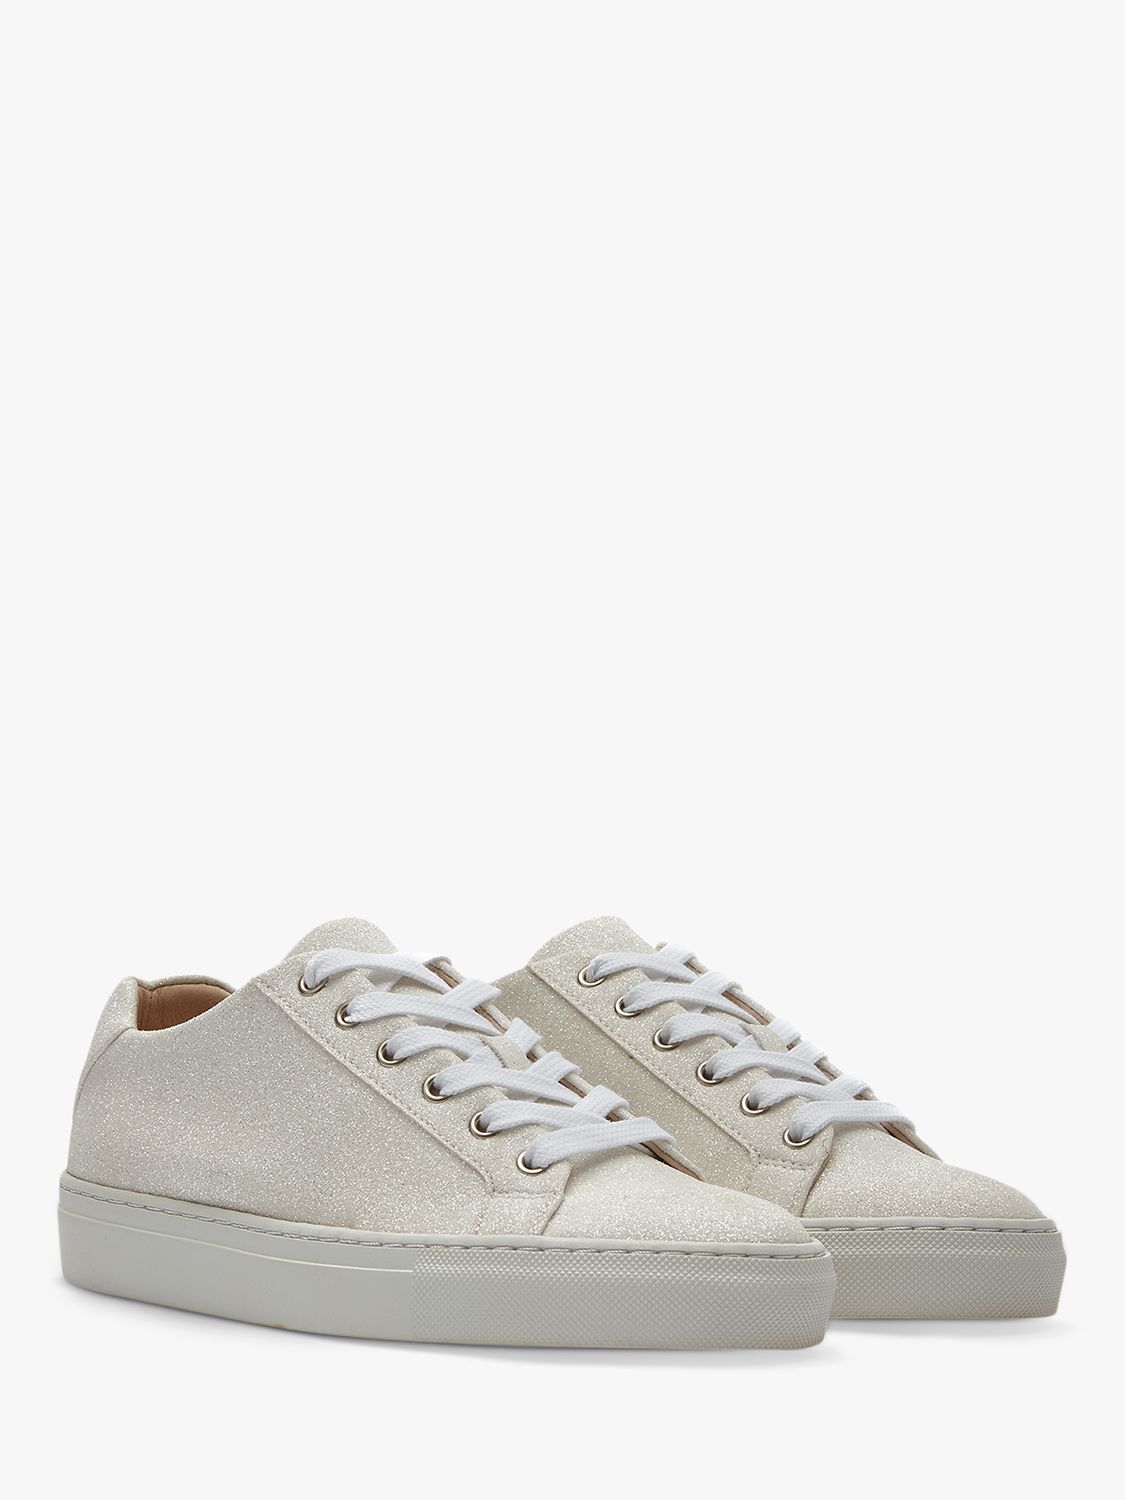 Rainbow Club Millie Shimmer Wedding Trainers, Ivory at John Lewis ...